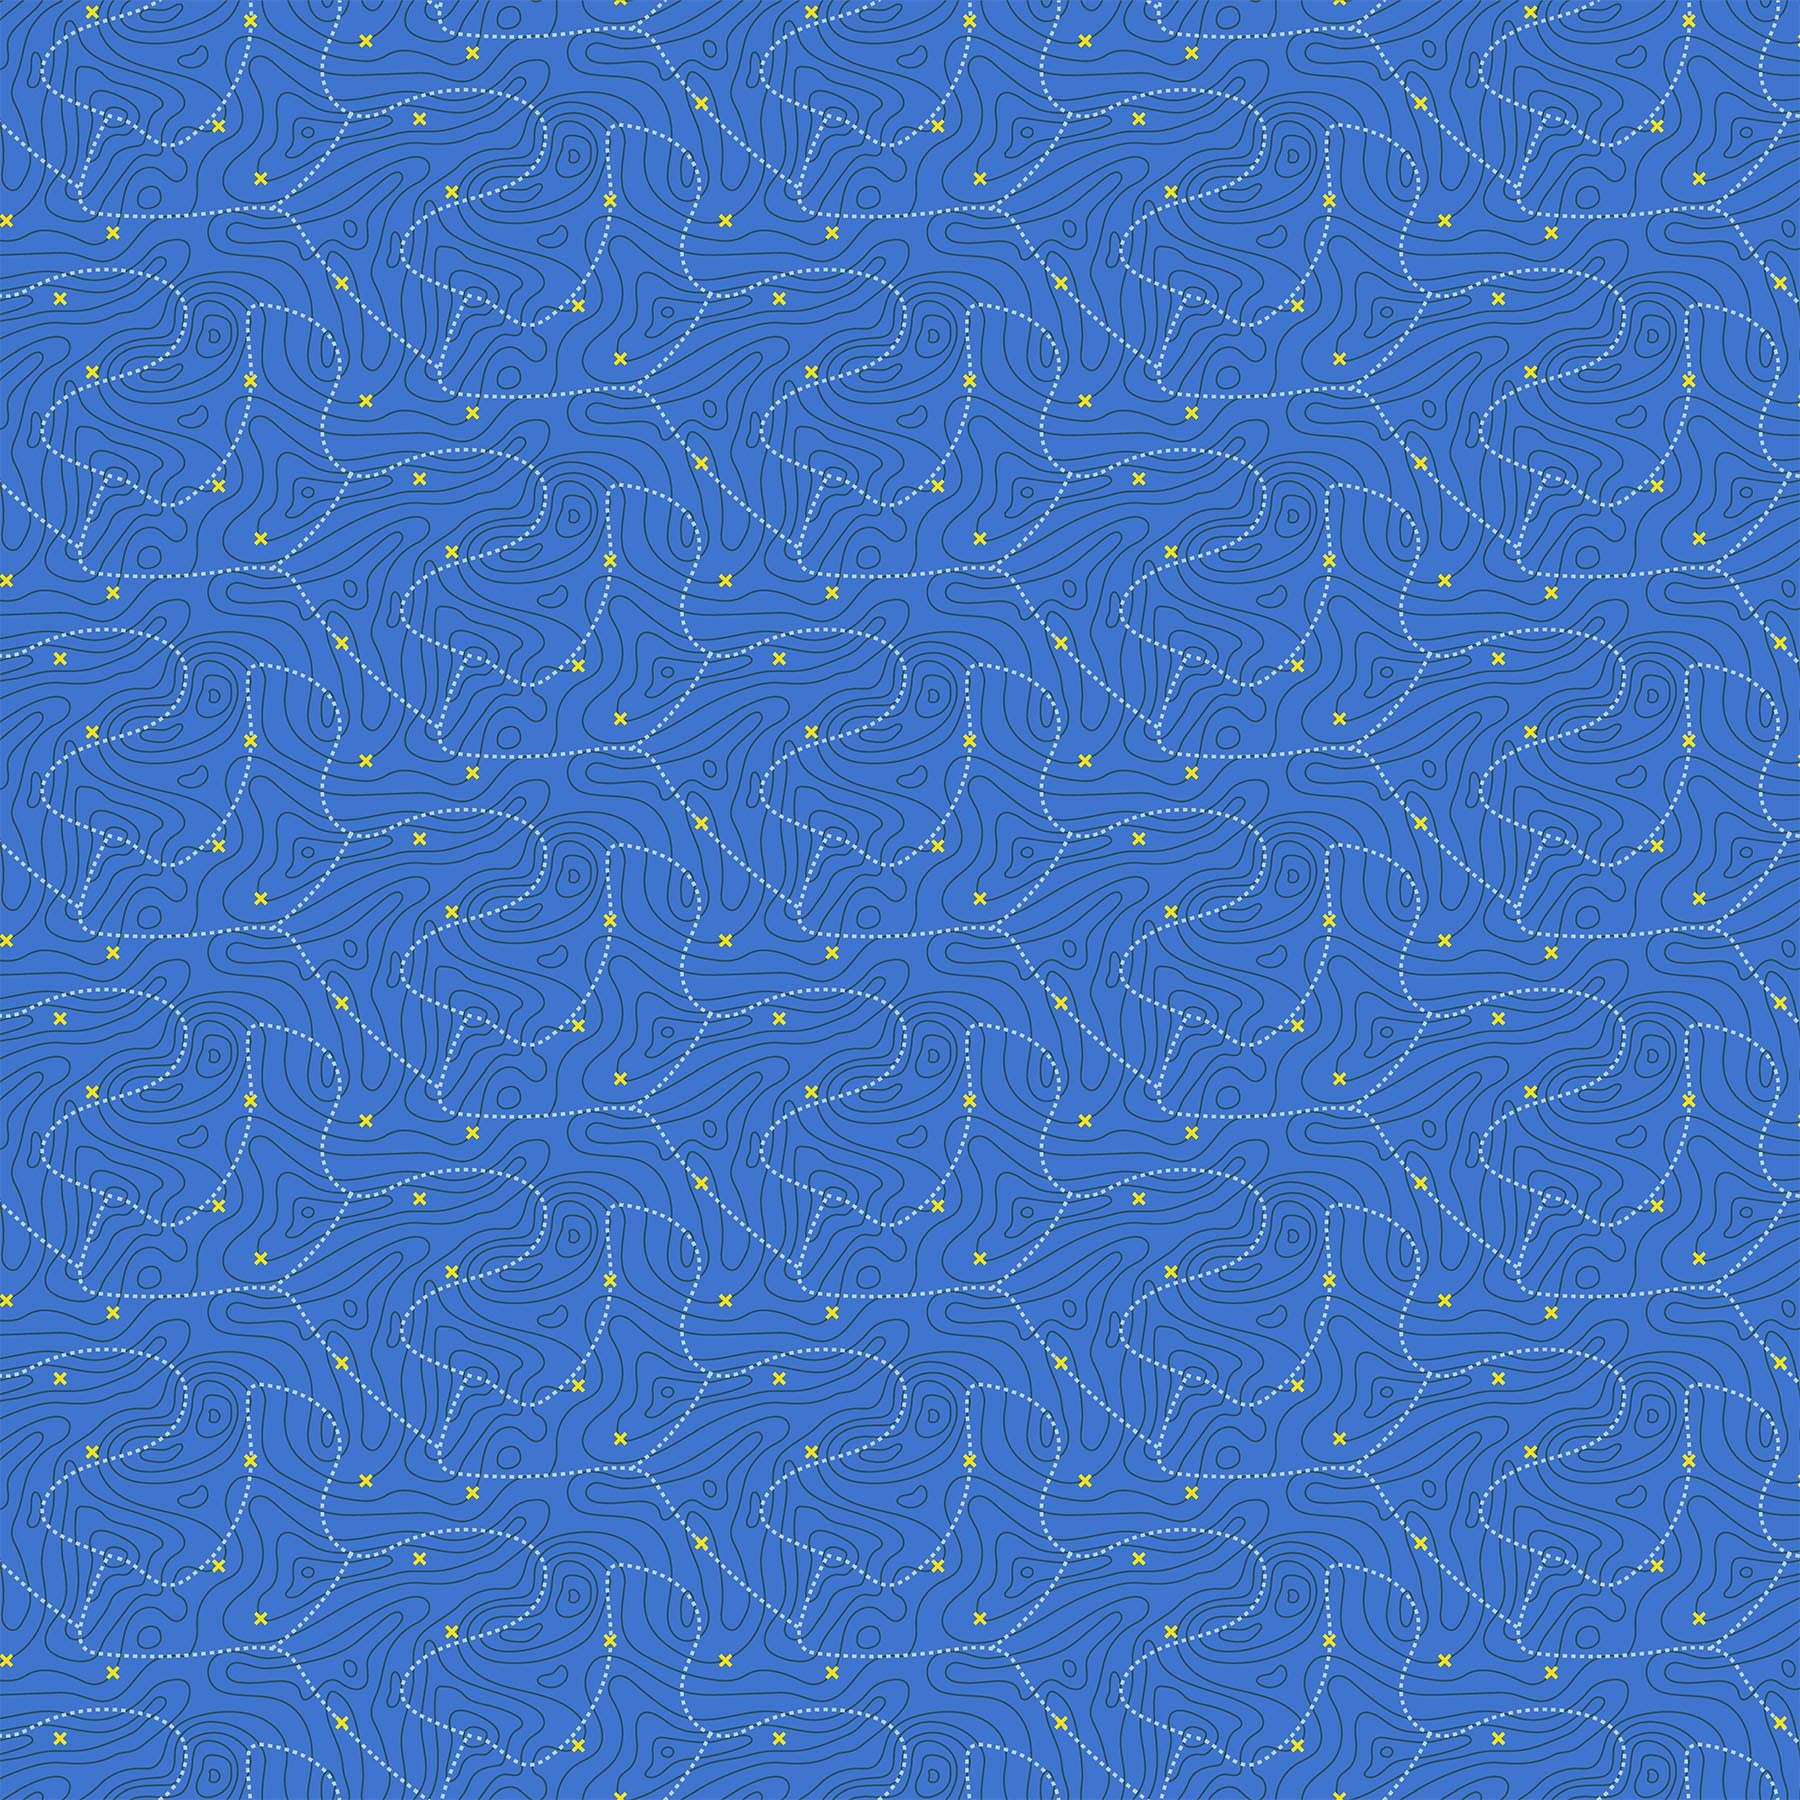 Around the Campfire - Topography Blue Fabric